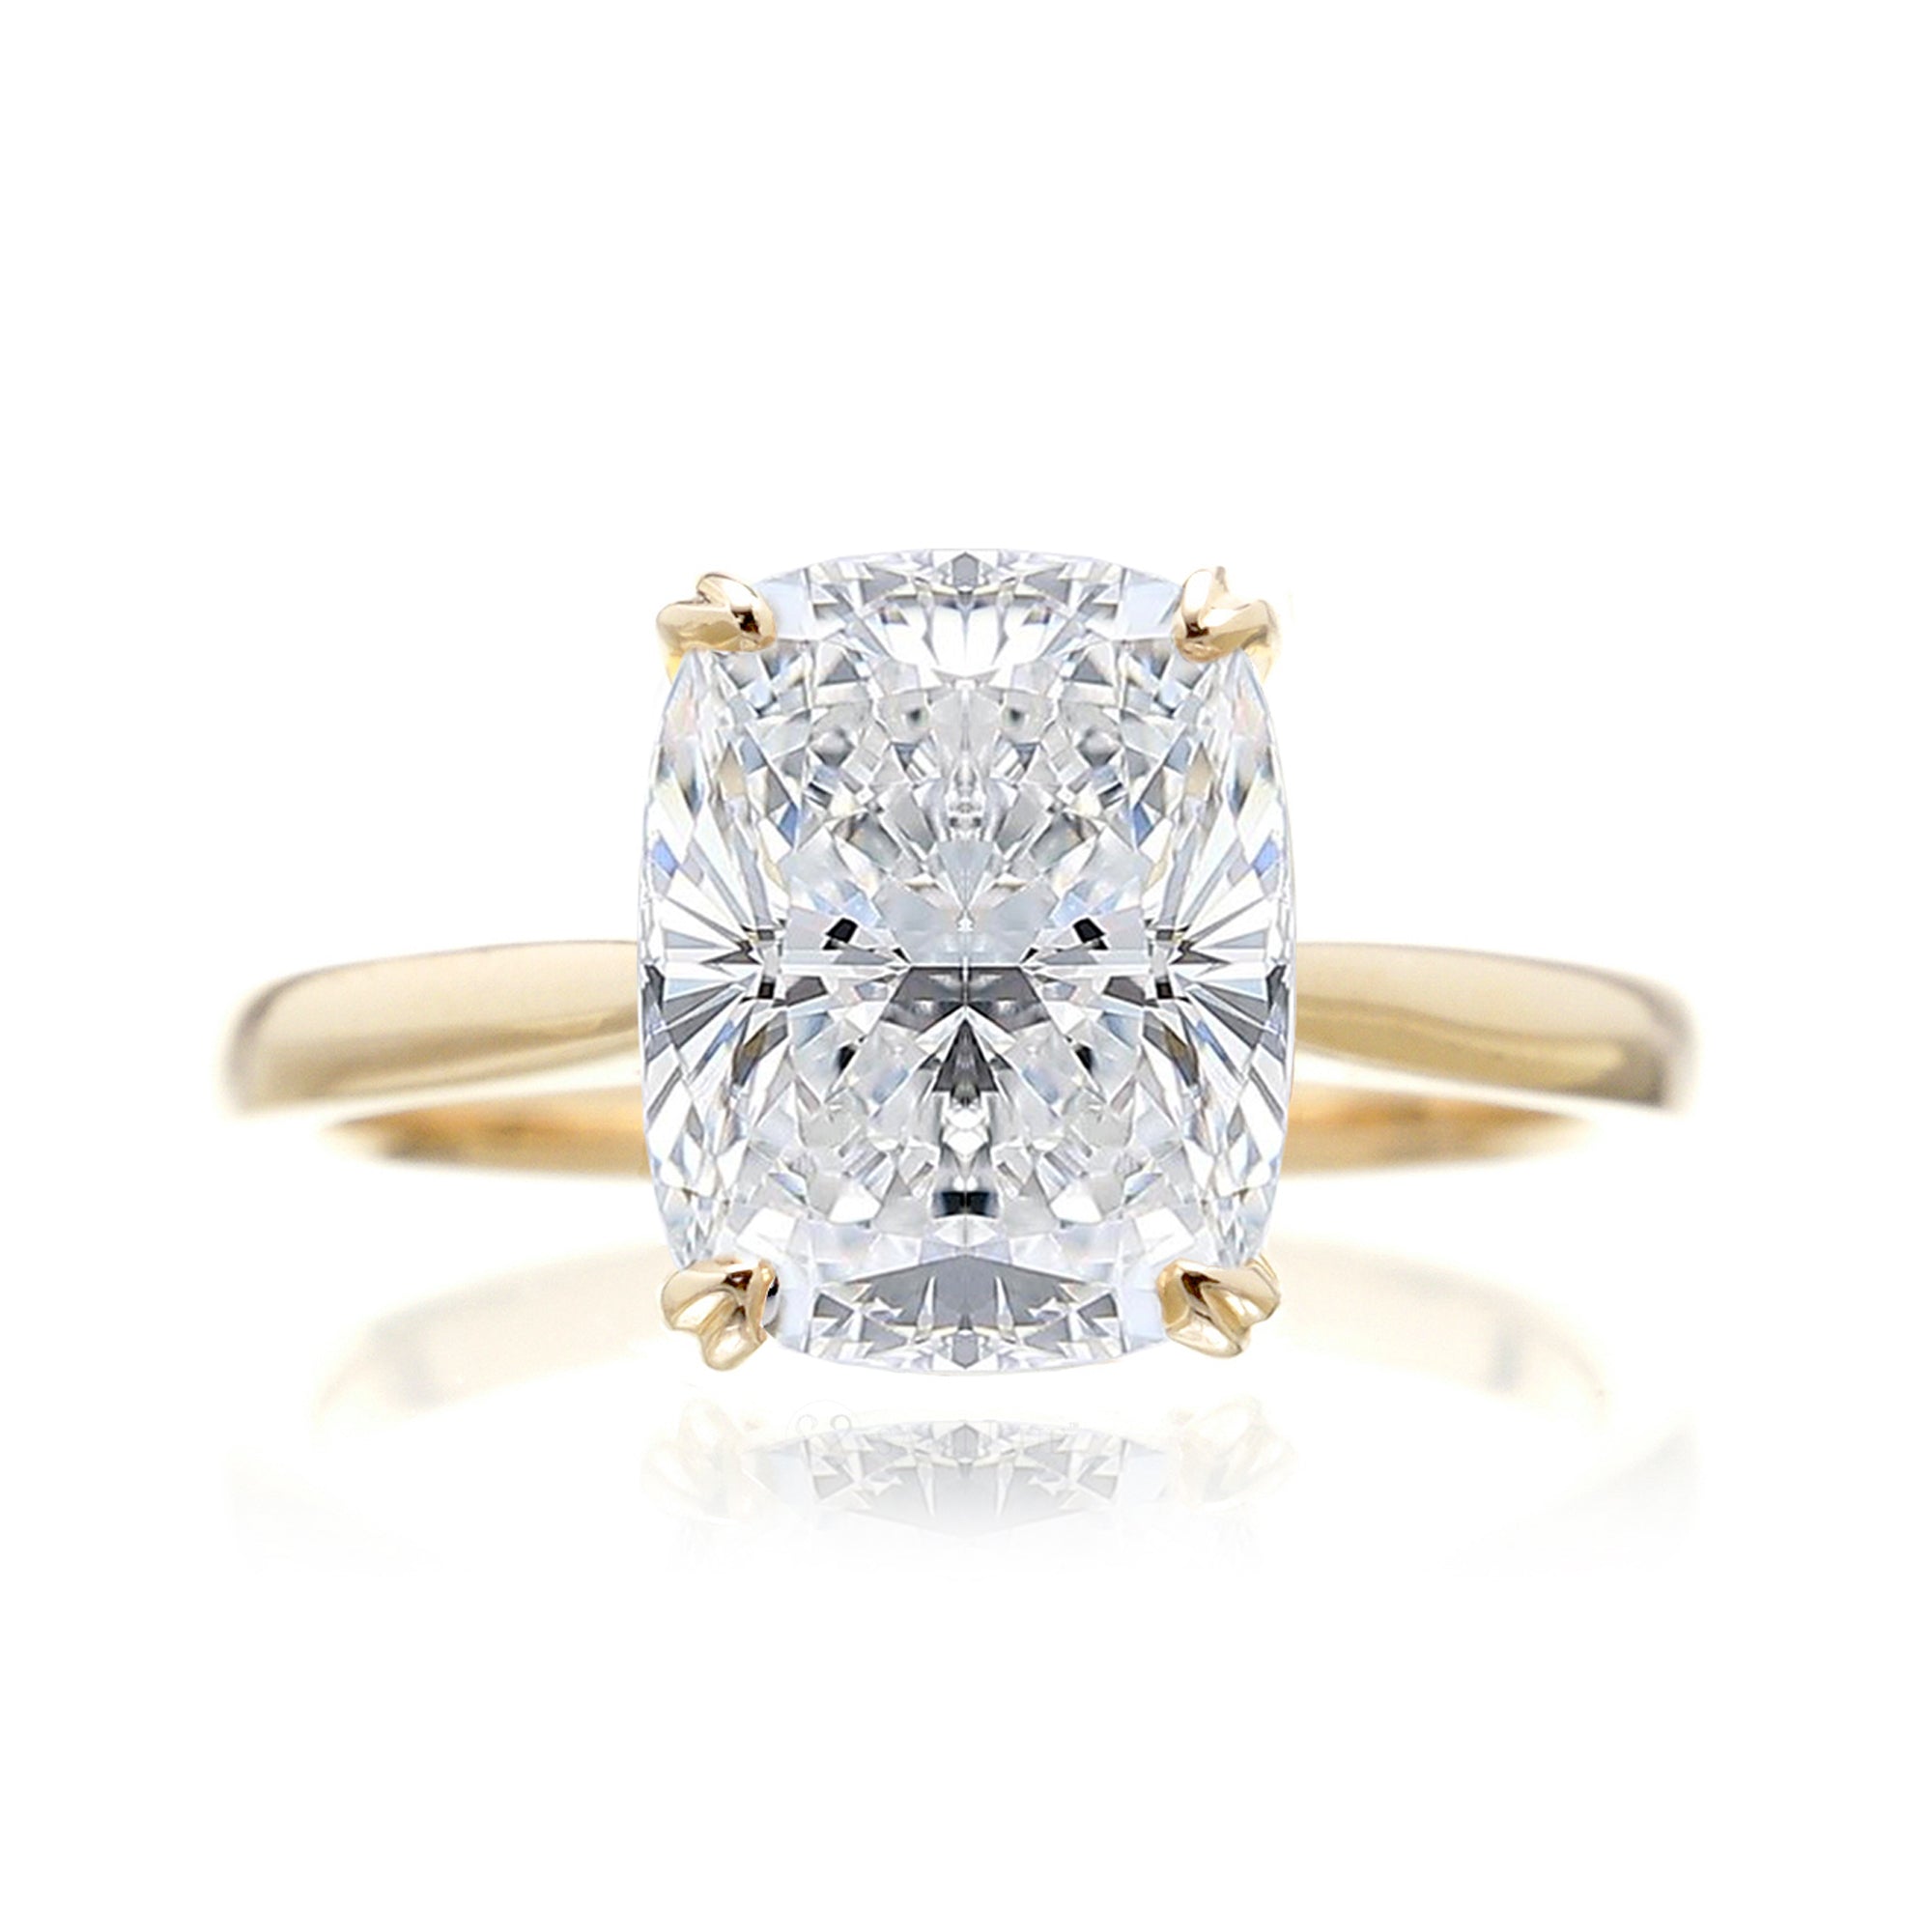 Cushion diamond solitaire engagement ring with solid band in yellow gold